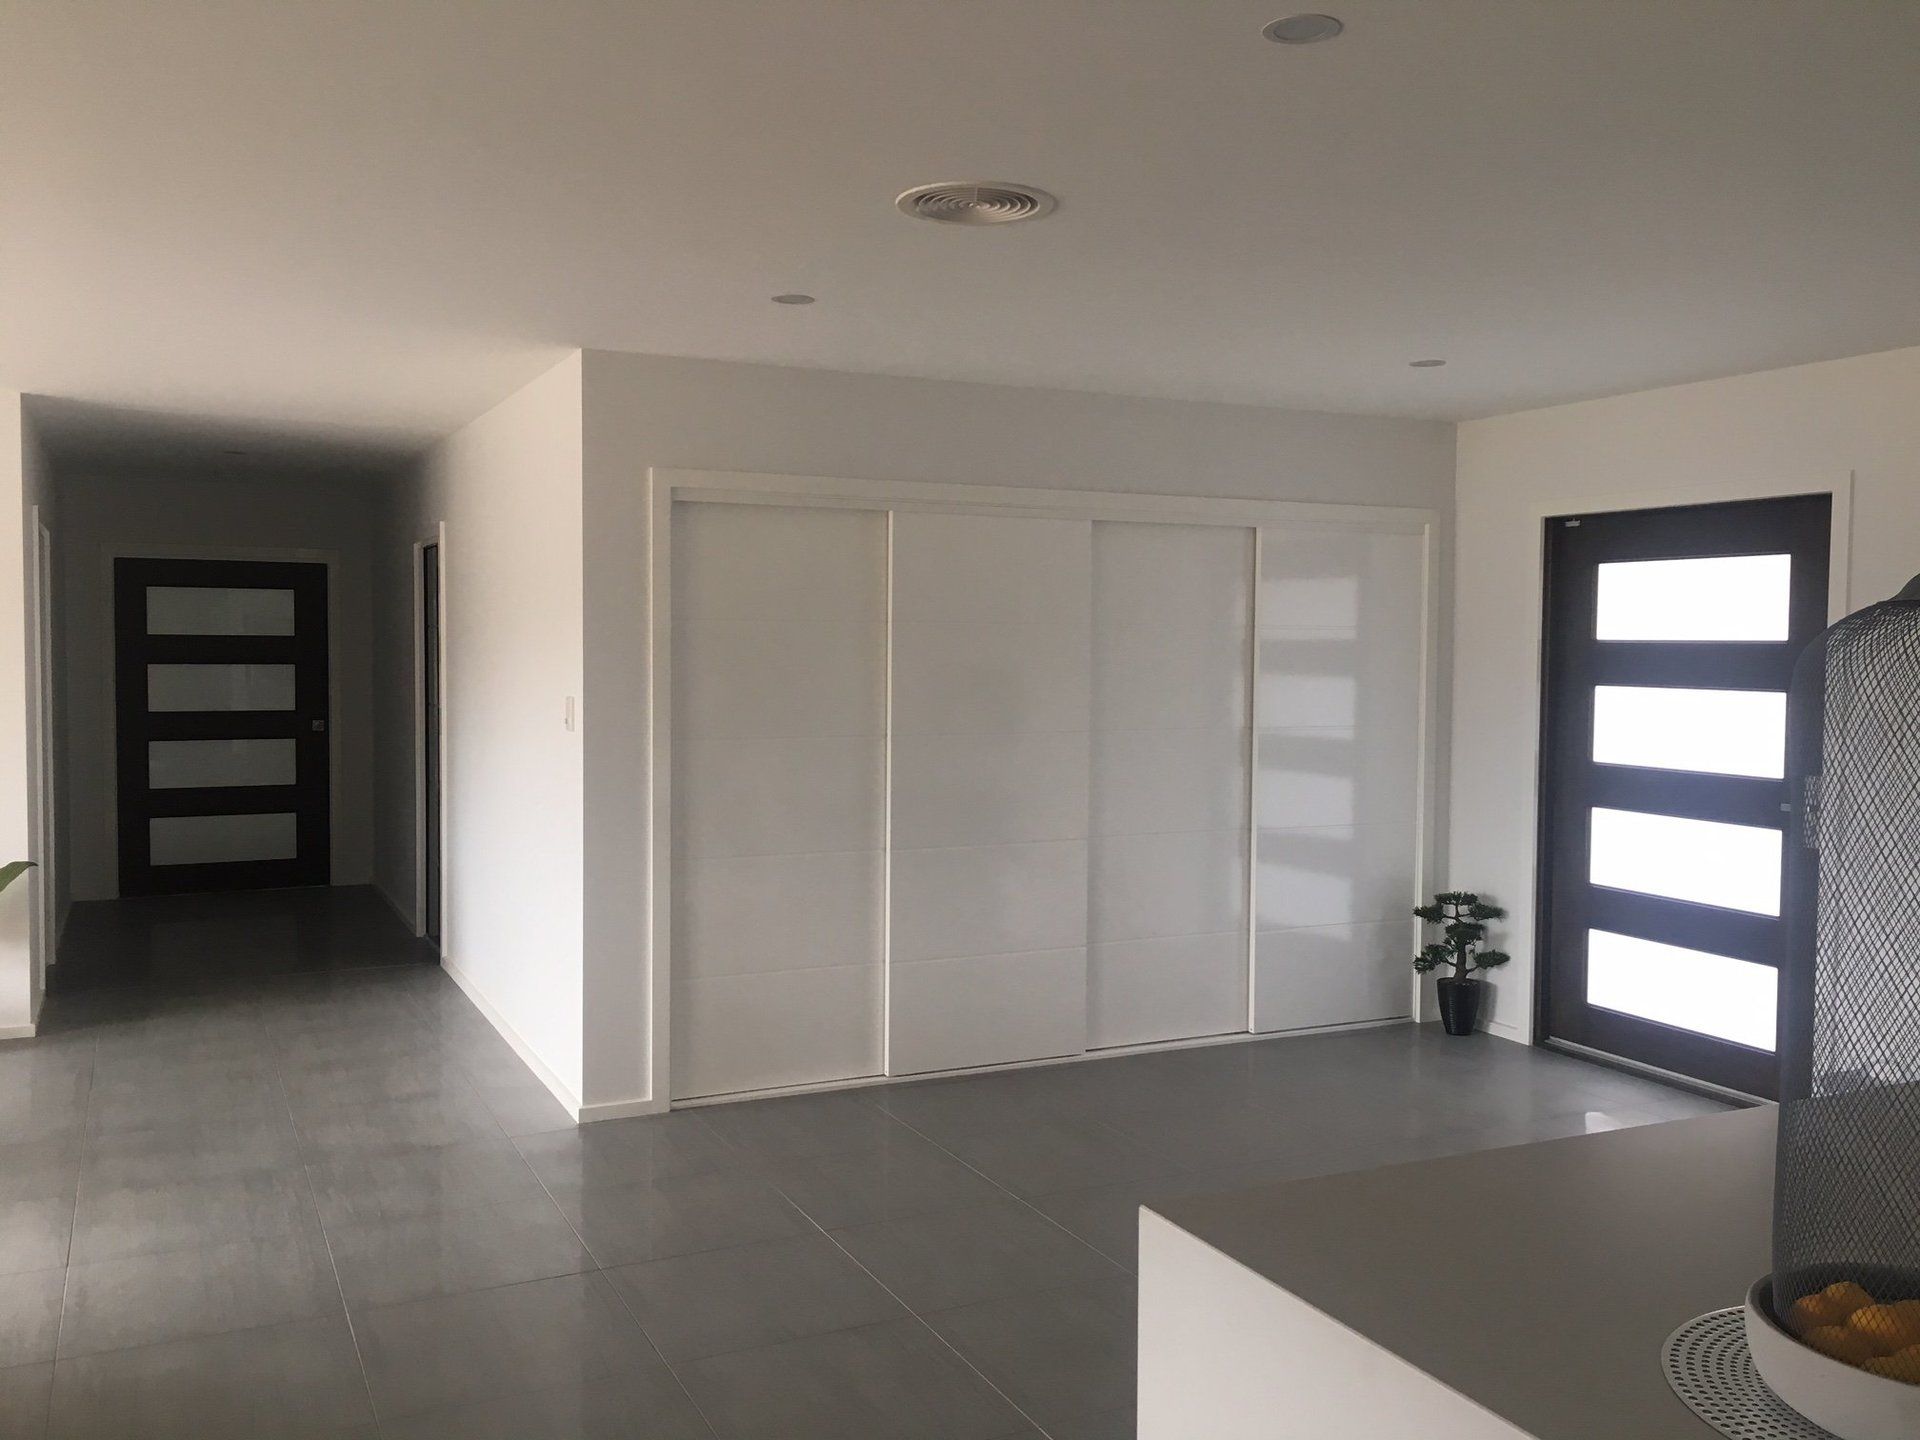 entry area with 3 glossy white doors and freshly painted white walls